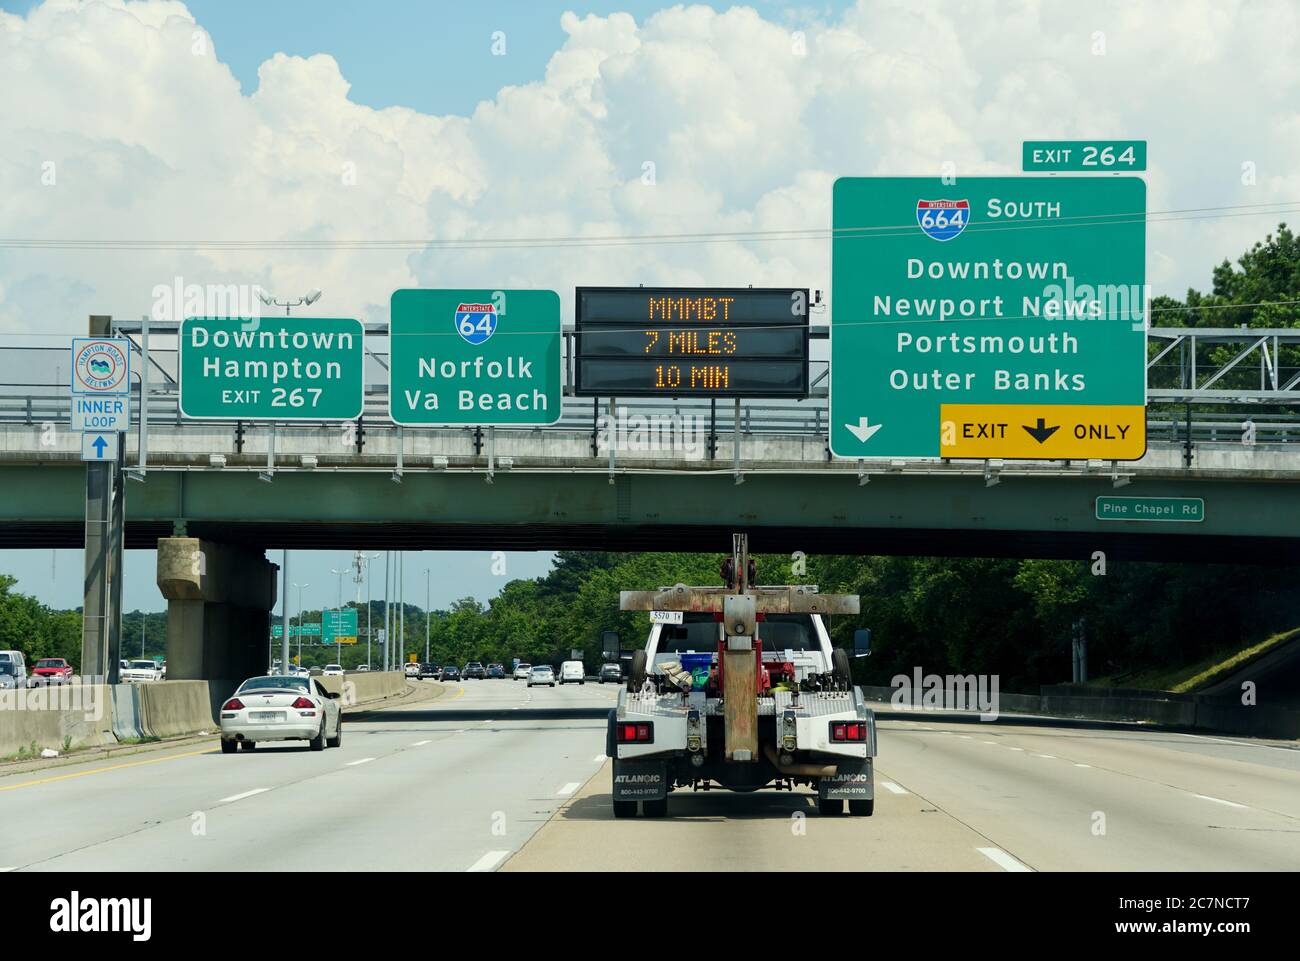 Virginia, U.S.A - July 1, 2020 - The highway signs towards Interstate 64 to Norfolk and Interstate 664 South to downtown, Newport News, Portsmouth and Stock Photo